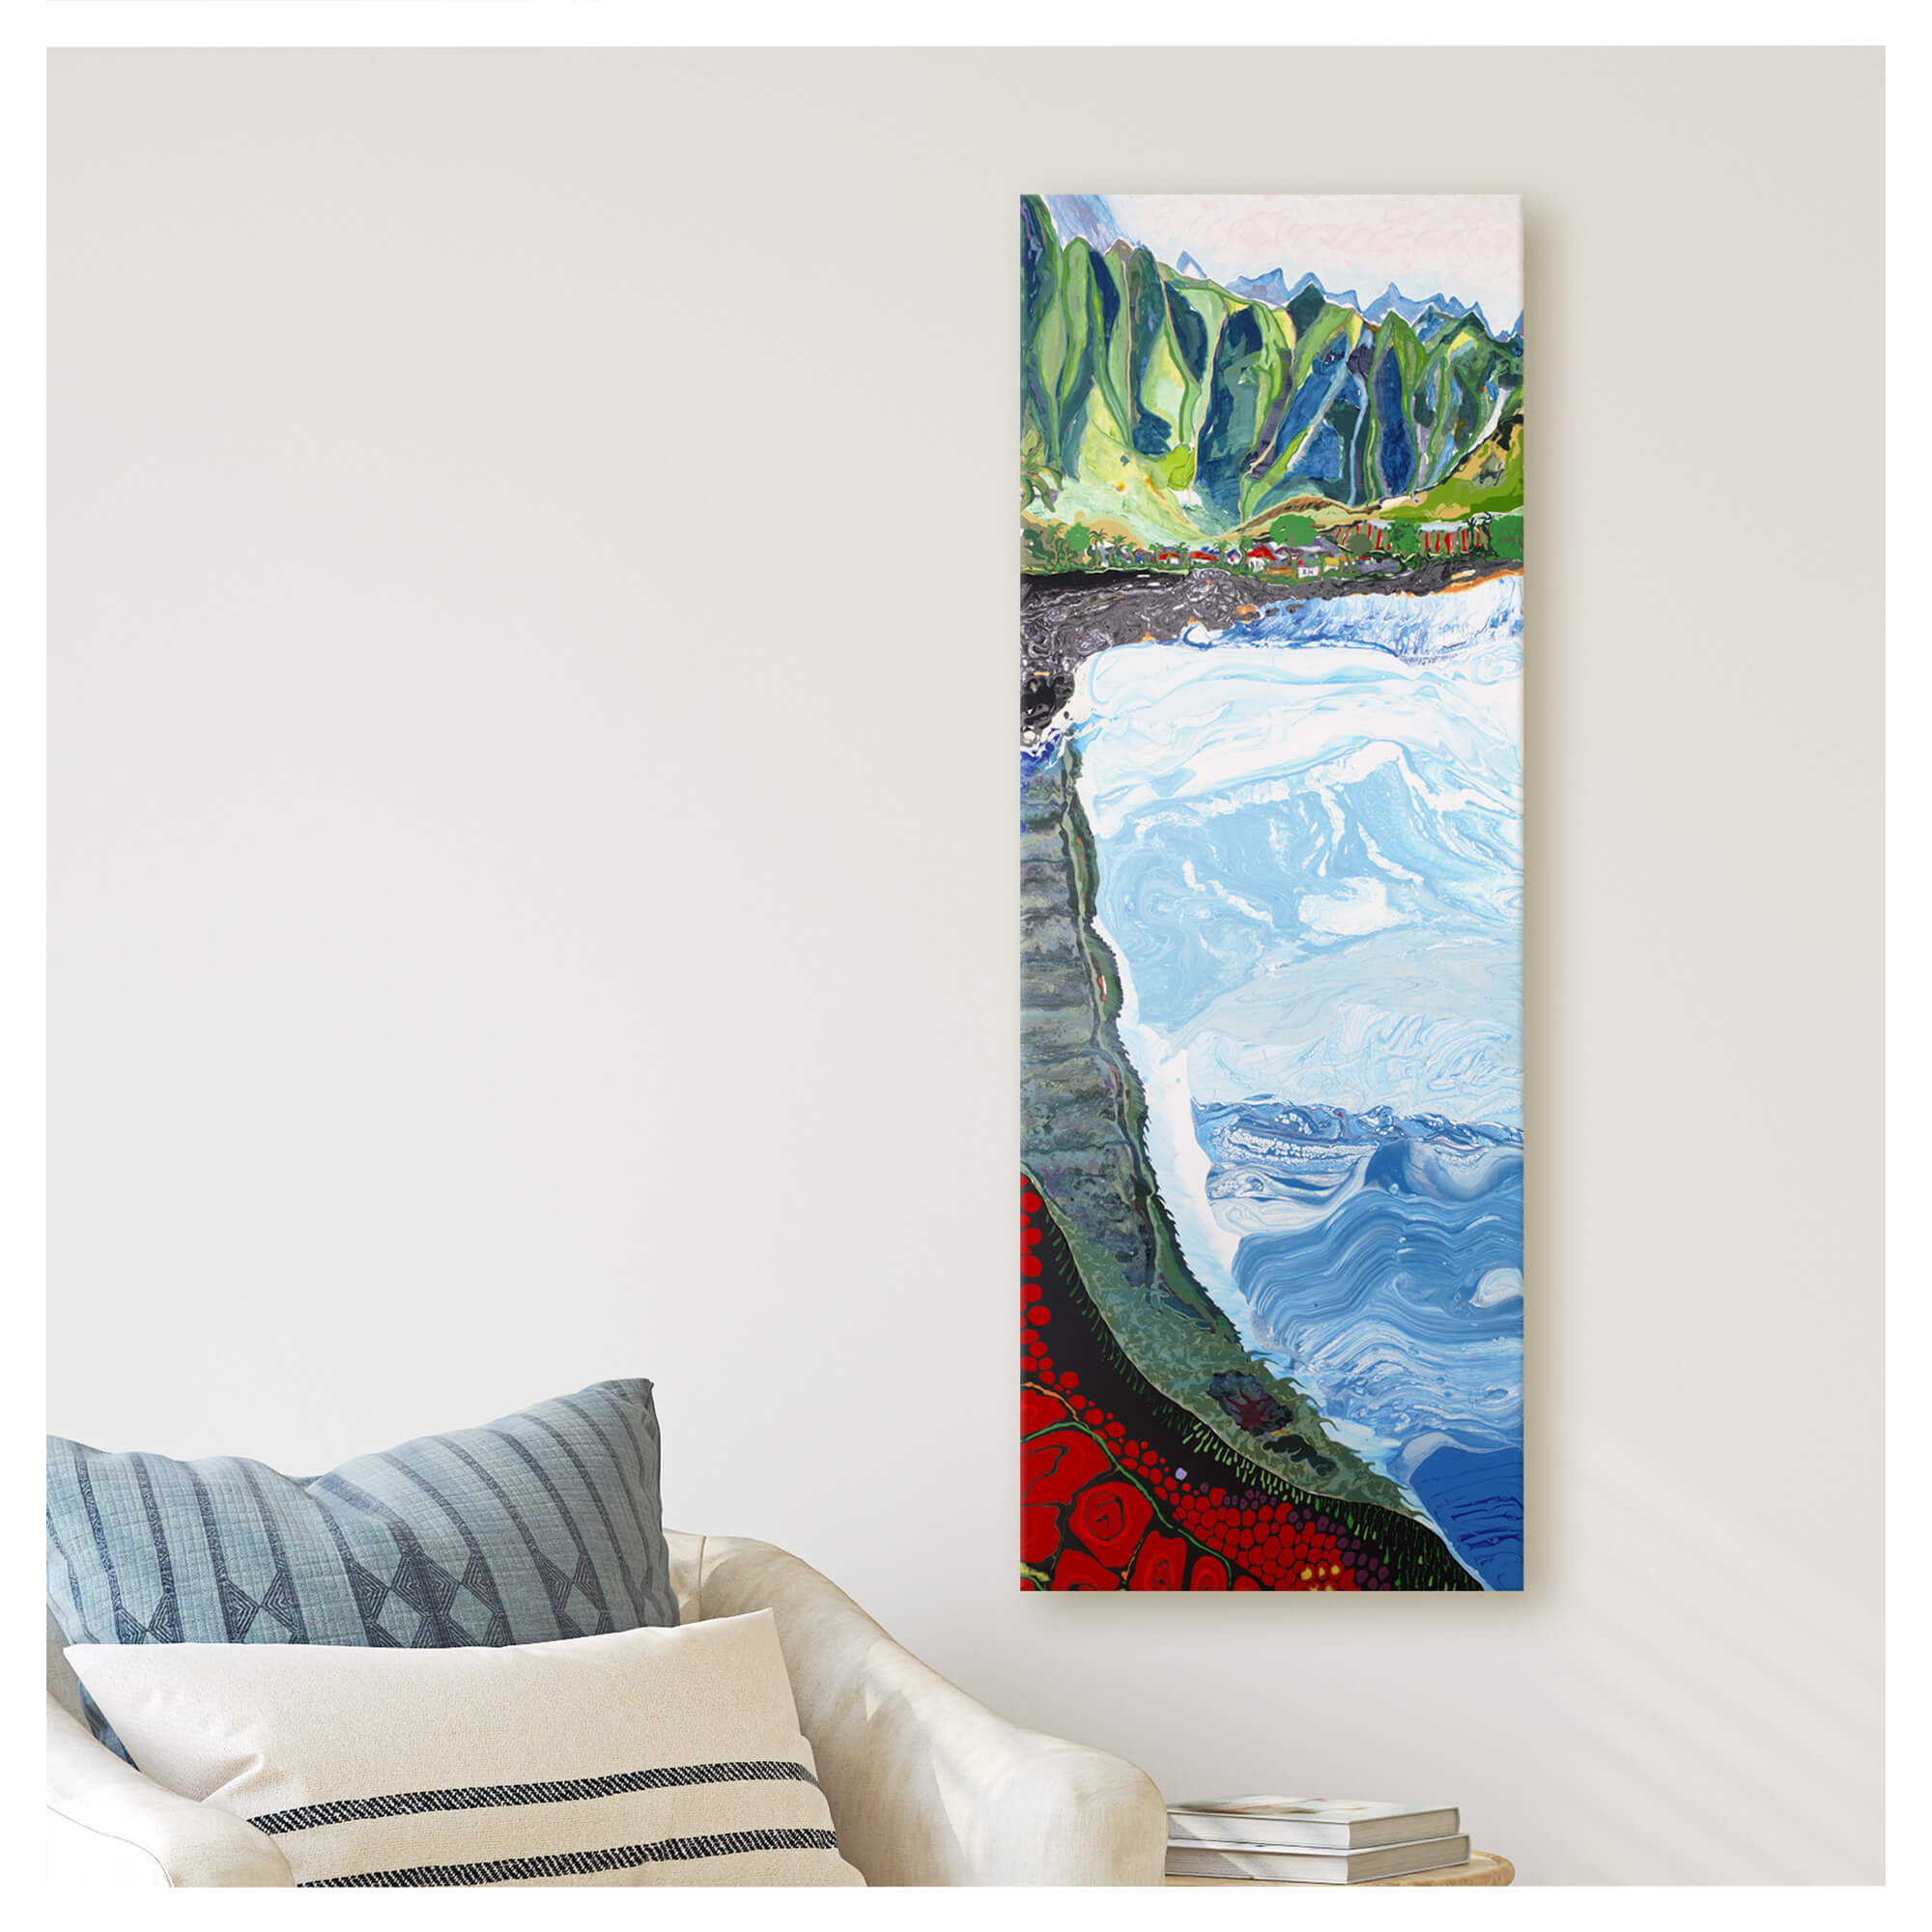 canvas art print featuring a landscape with high mountains and large crashing waves by Hawaii artist Robert Hazzard